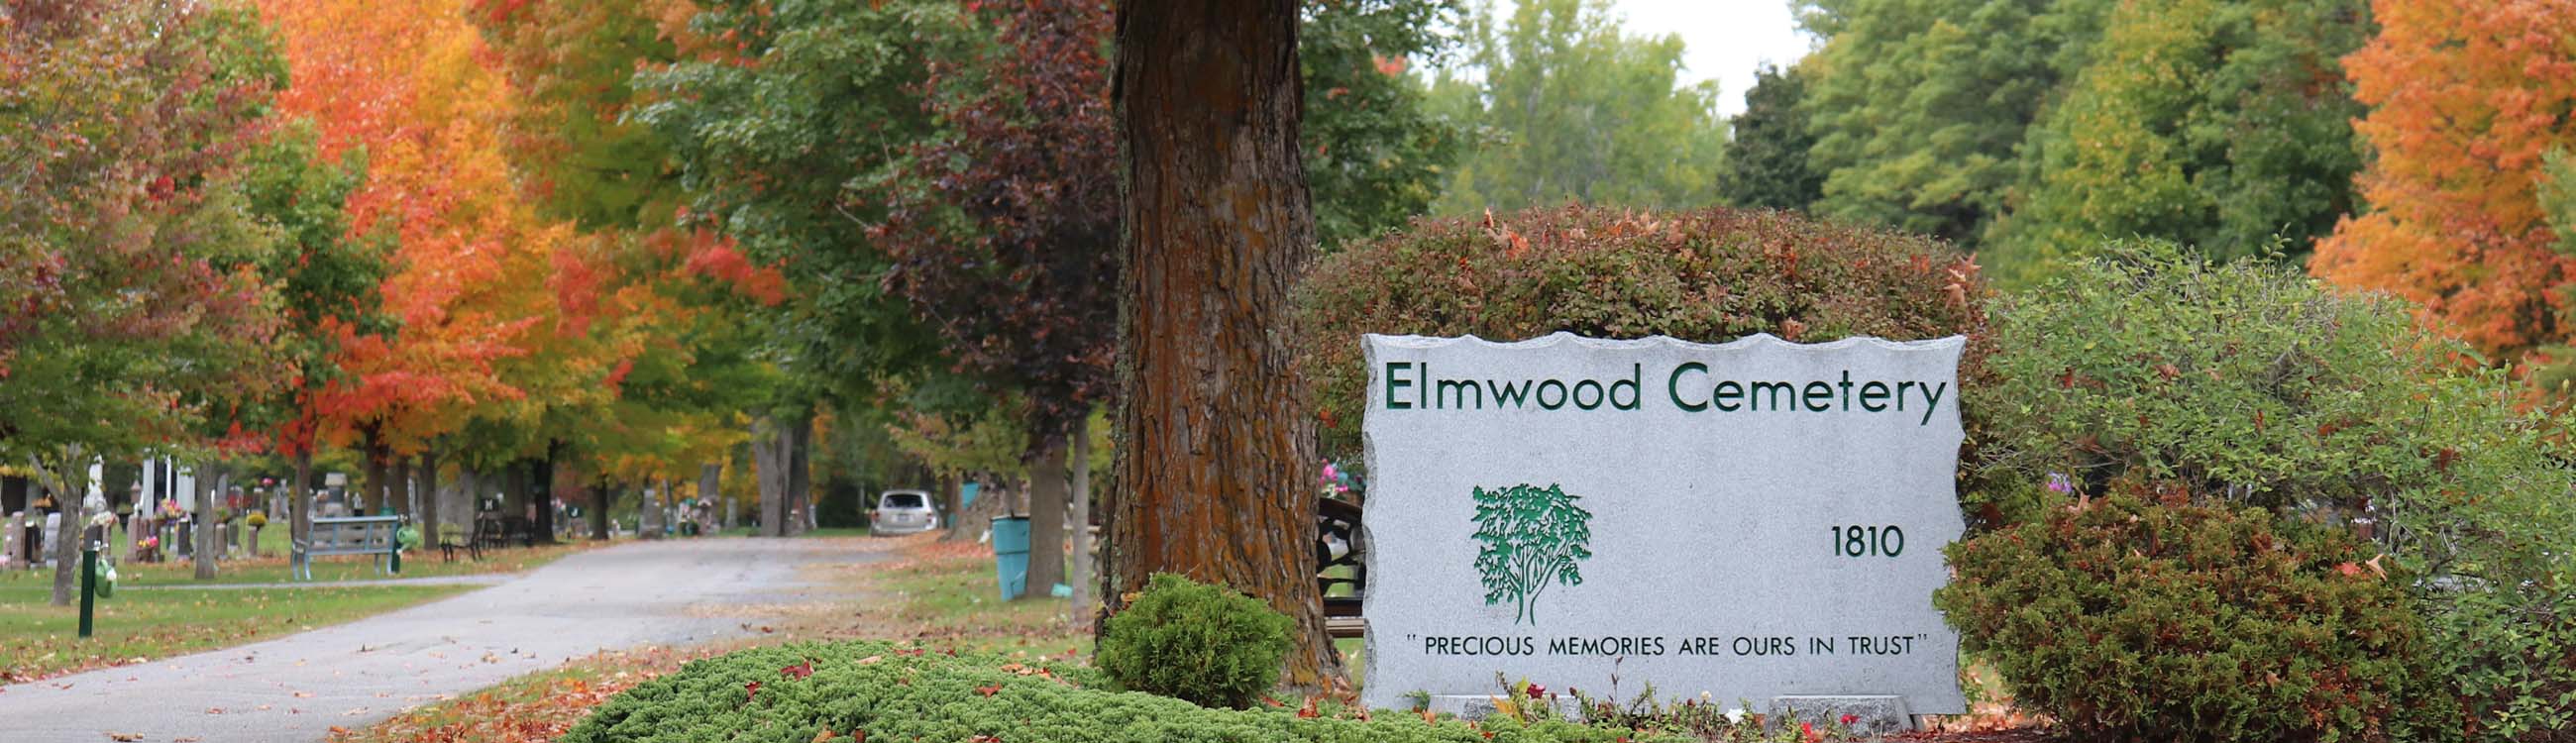 Sign for Elmwood Cemetery and trees with leaves bearing fall colours